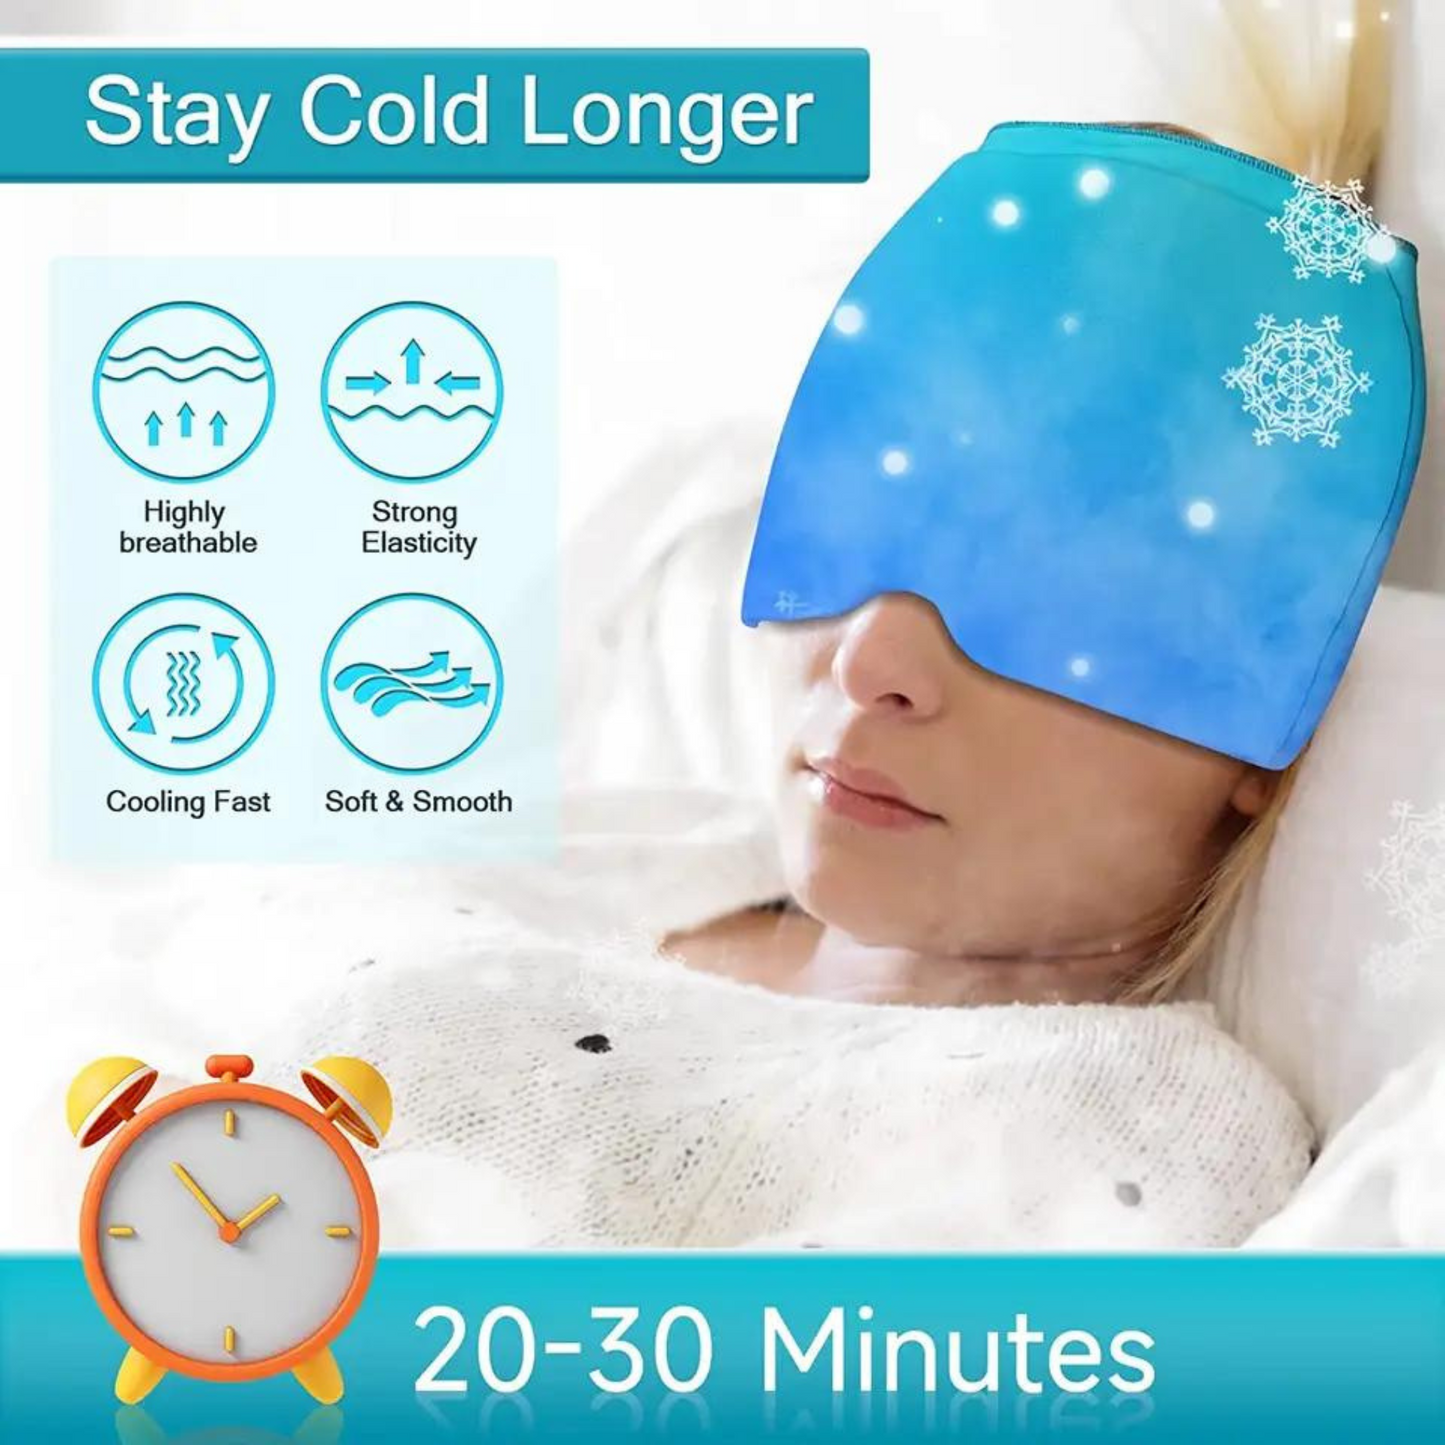 Migraine relief cap – cold or hot soothing compression therapy